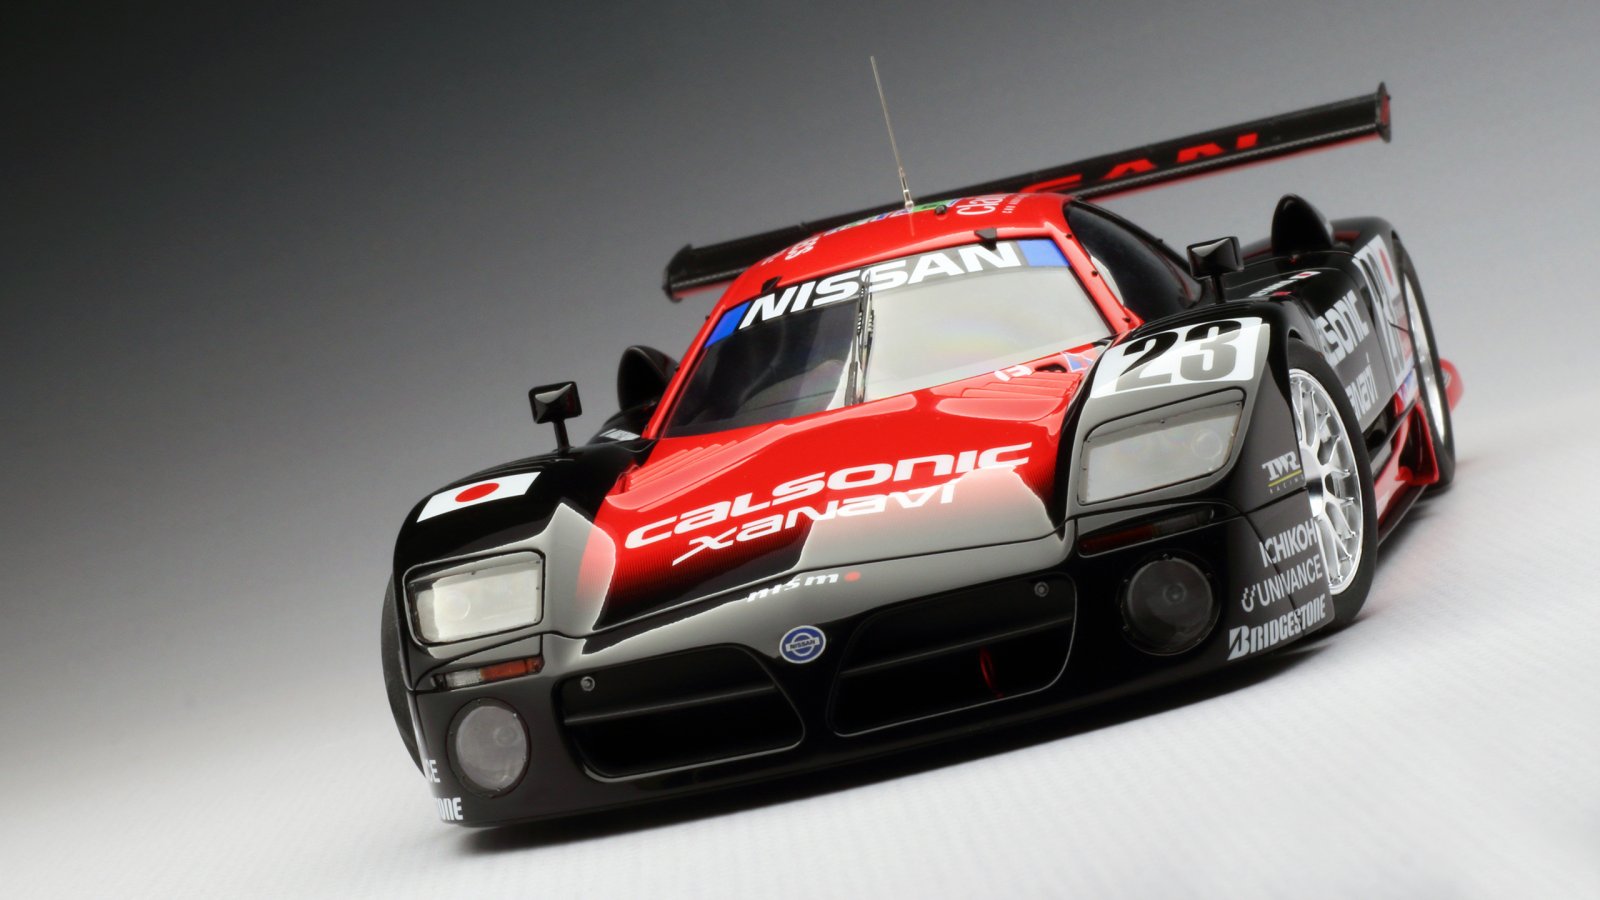 Nissan R390 GT1 24 Hours of Le Mans'97